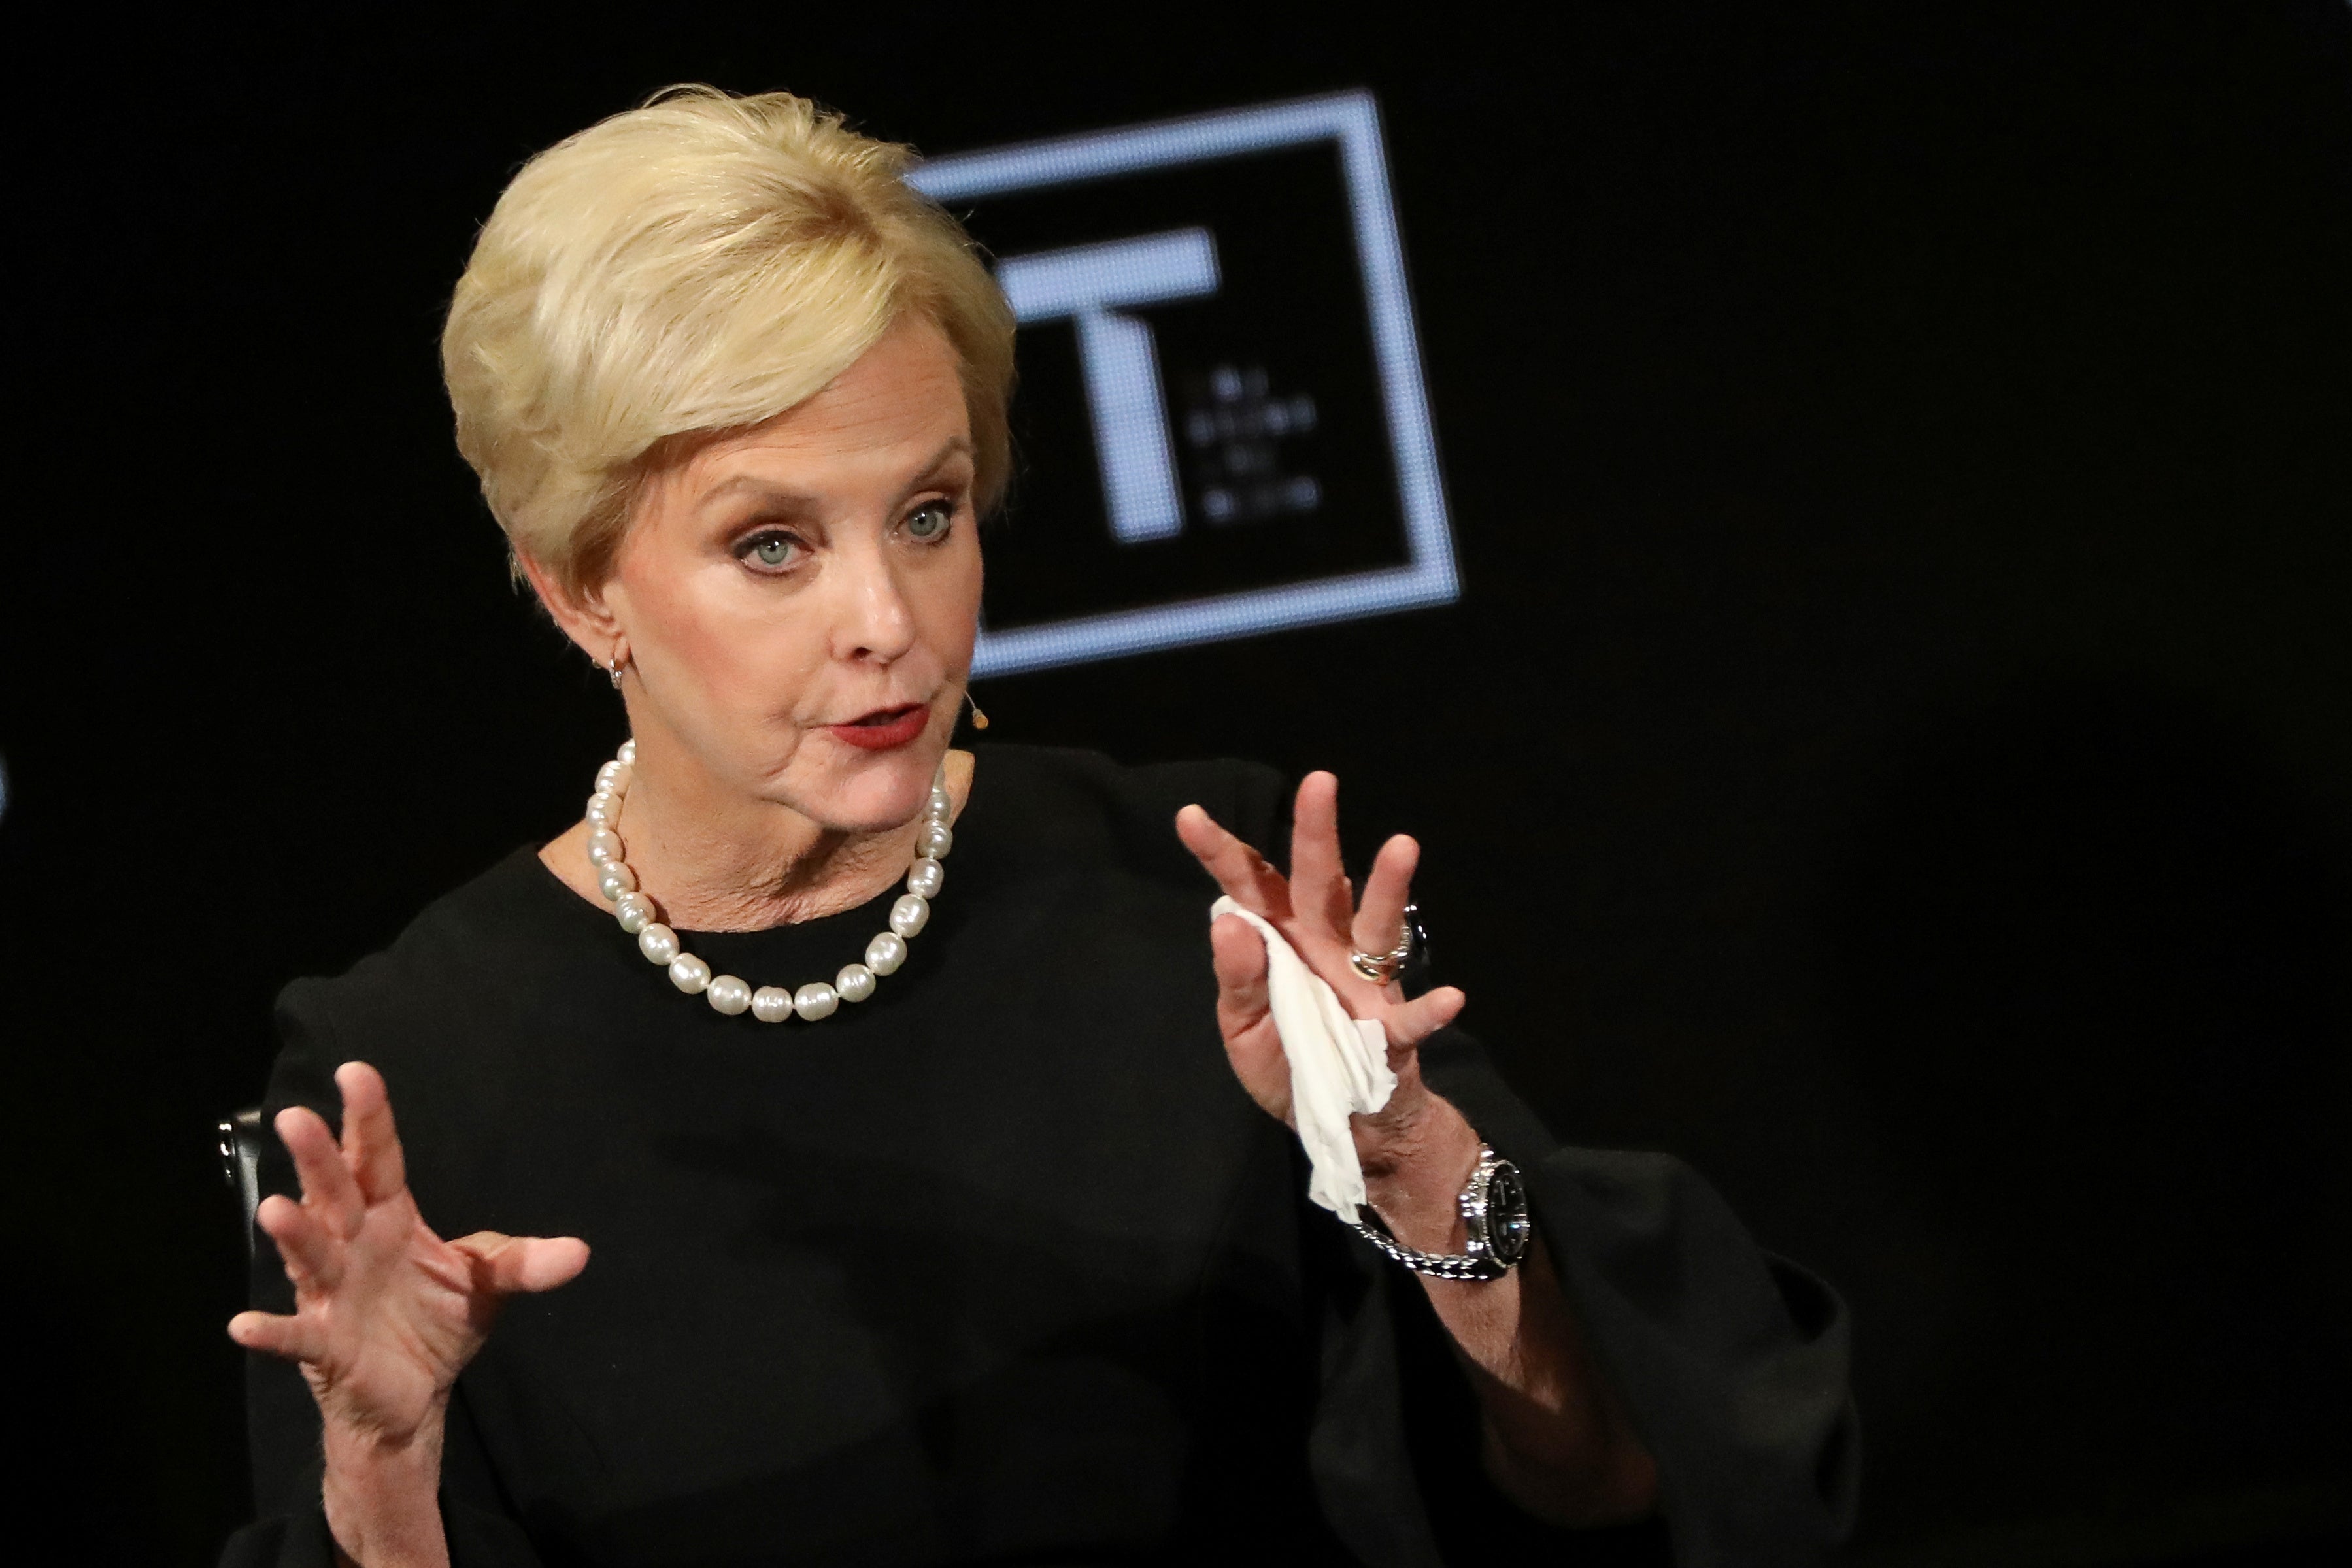 Cindy McCain gestures with both hands while speaking onstage